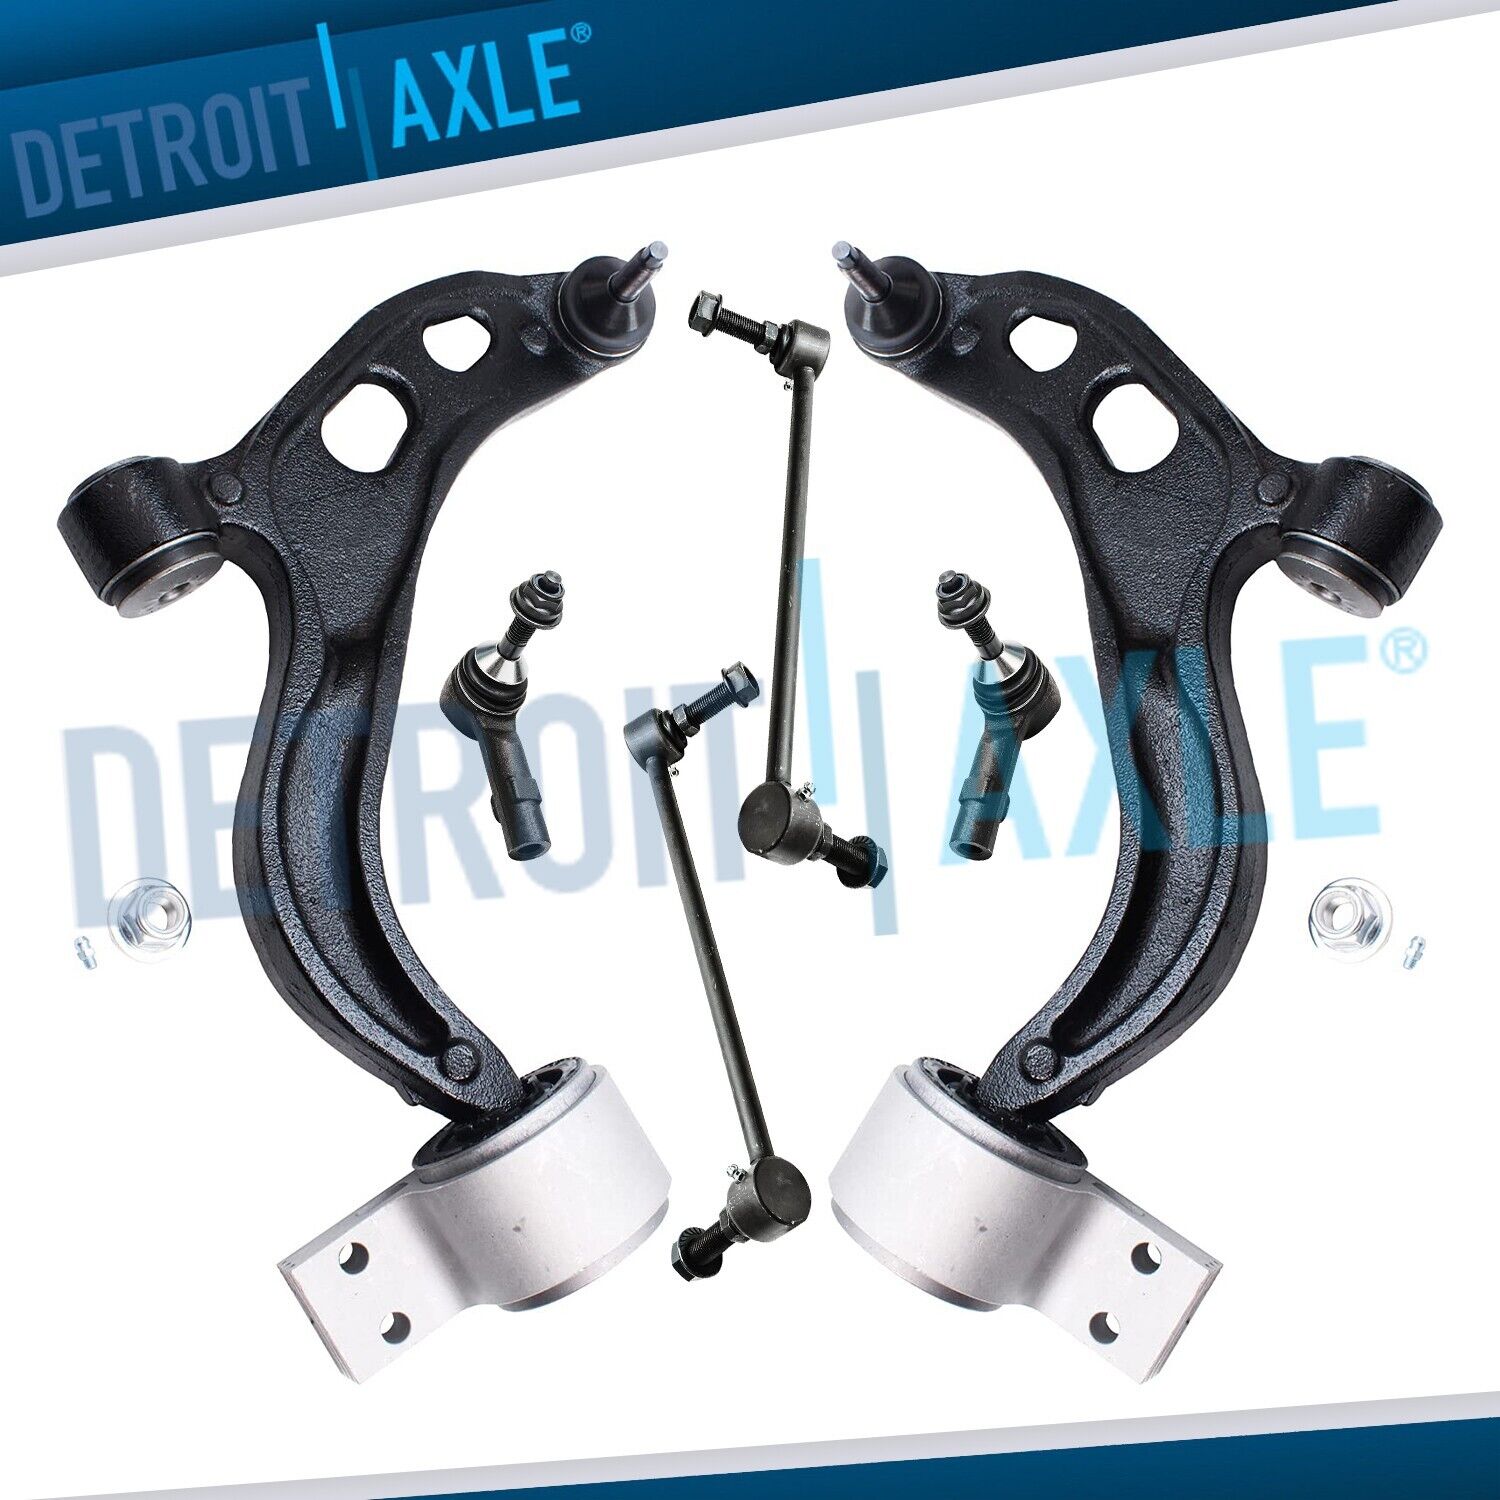 Front Lower Control Arms Sway Bar Link Kit for 2010-2012 Ford Taurus Lincoln MKS